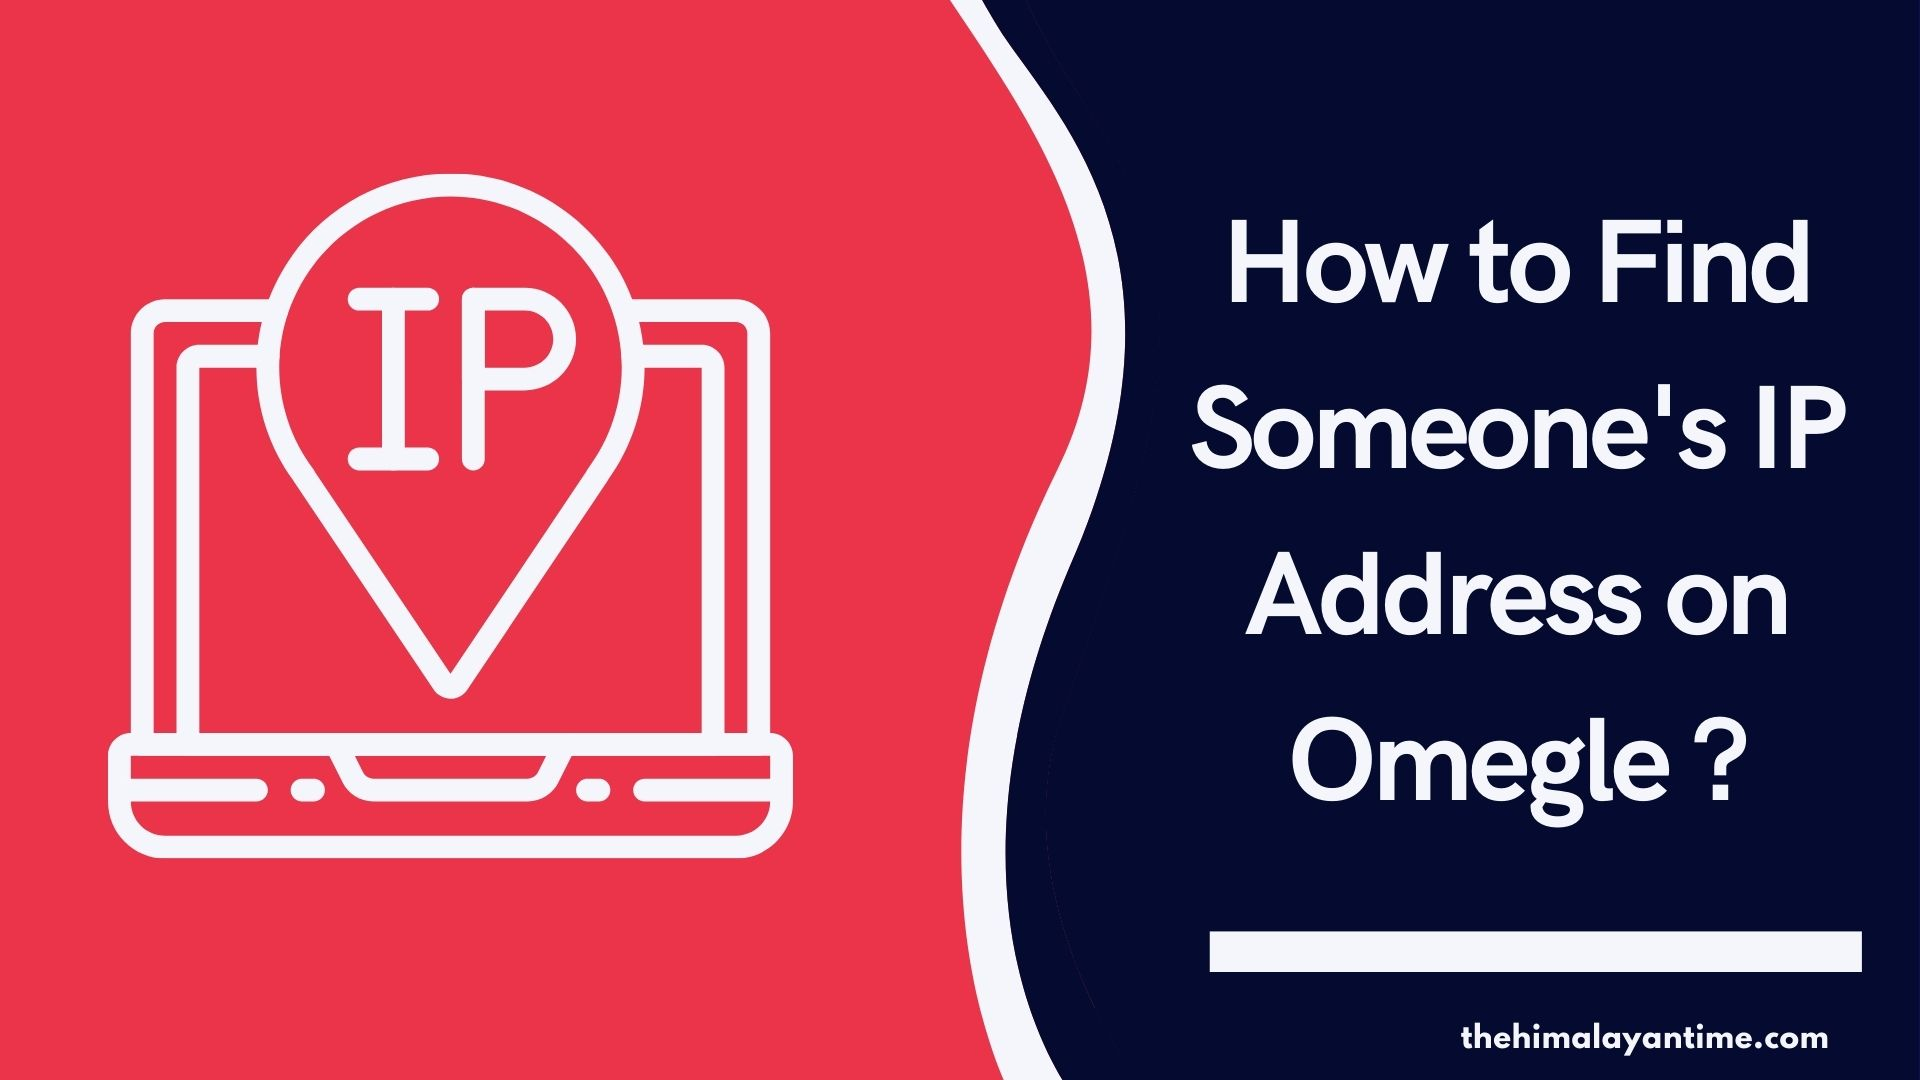 Find Someone's IP Address on Omegle